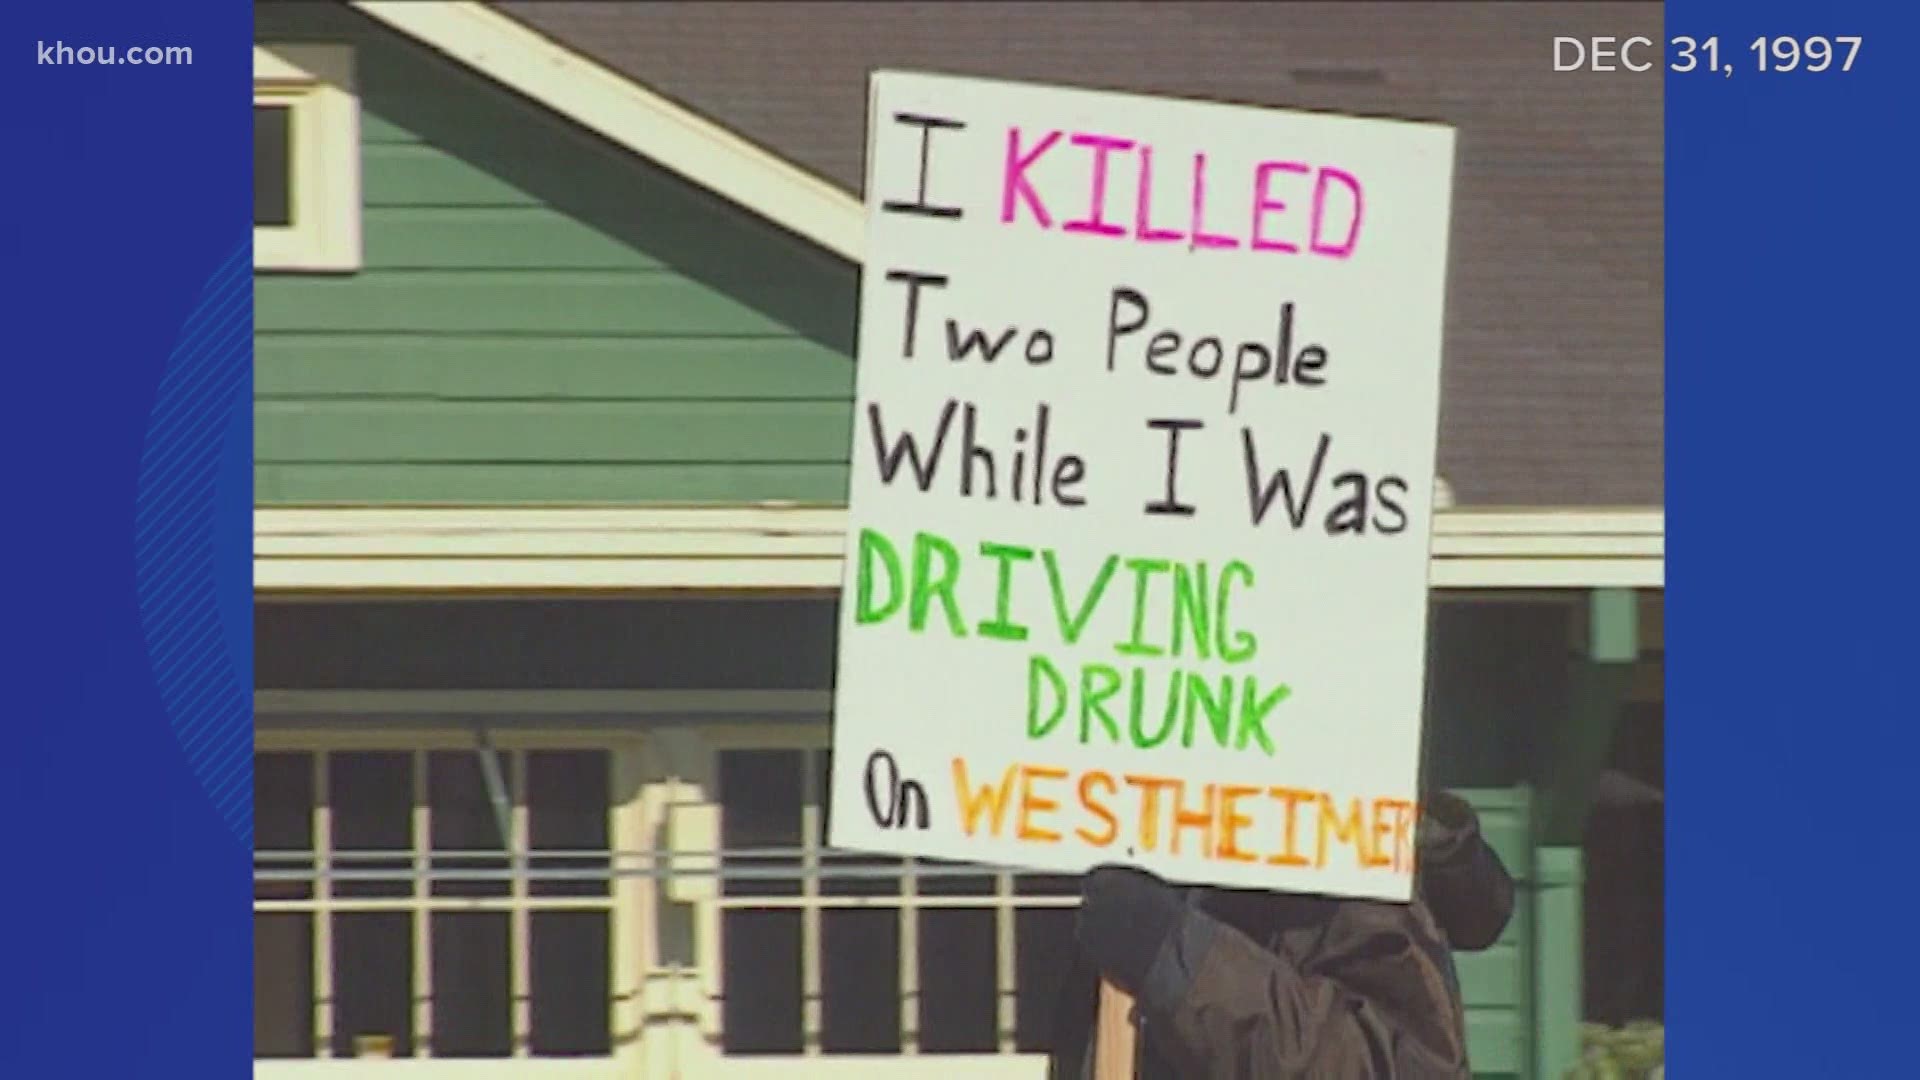 When Michael Hubachek was 19, he was forced to walk down the street holding a sign saying he killed two people while drunk driving.